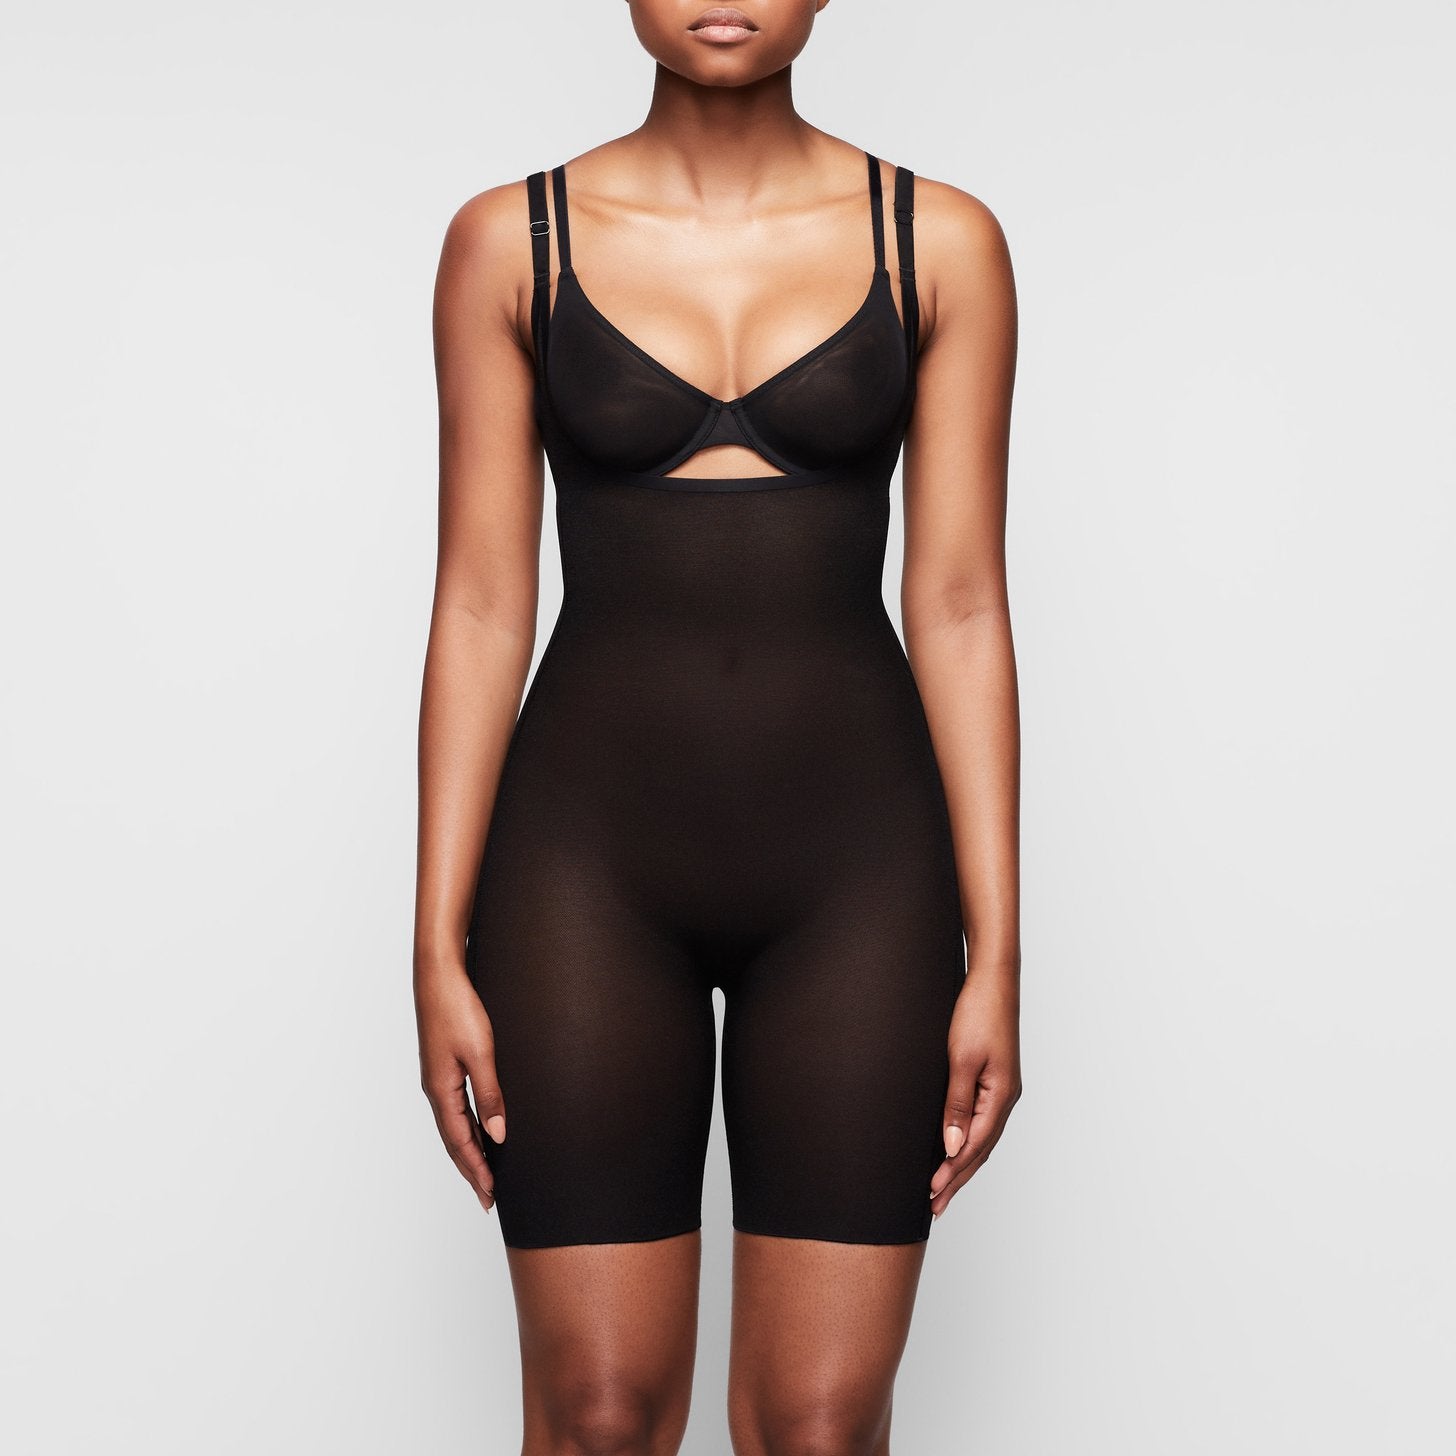 Skims Body Suits 2x And 4x Shapewear for Sale in Visalia, CA